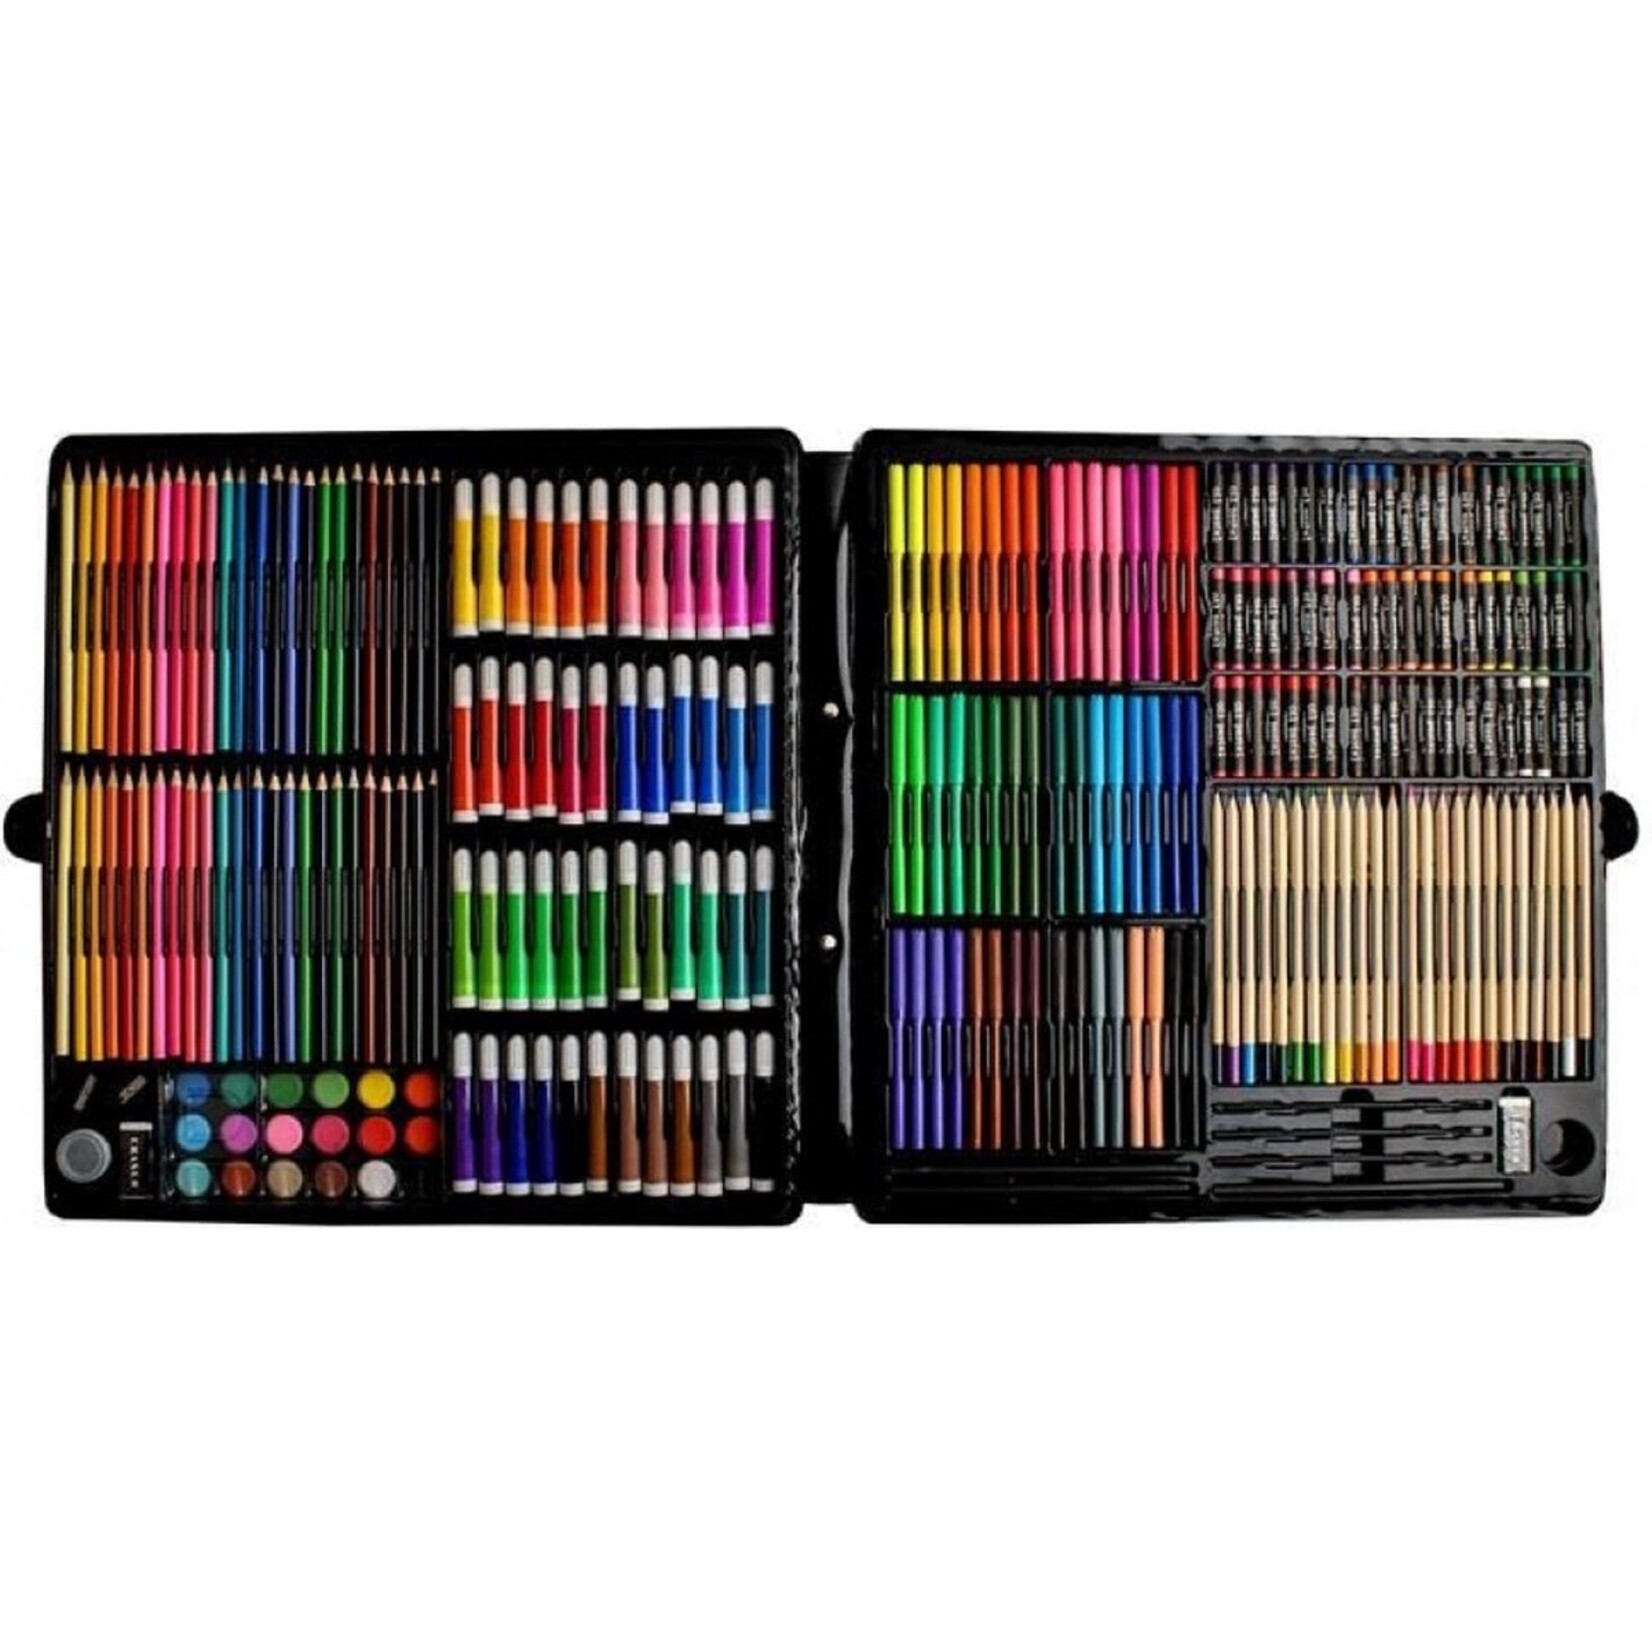 XXL Professional crayons - Drawing box 288 pieces